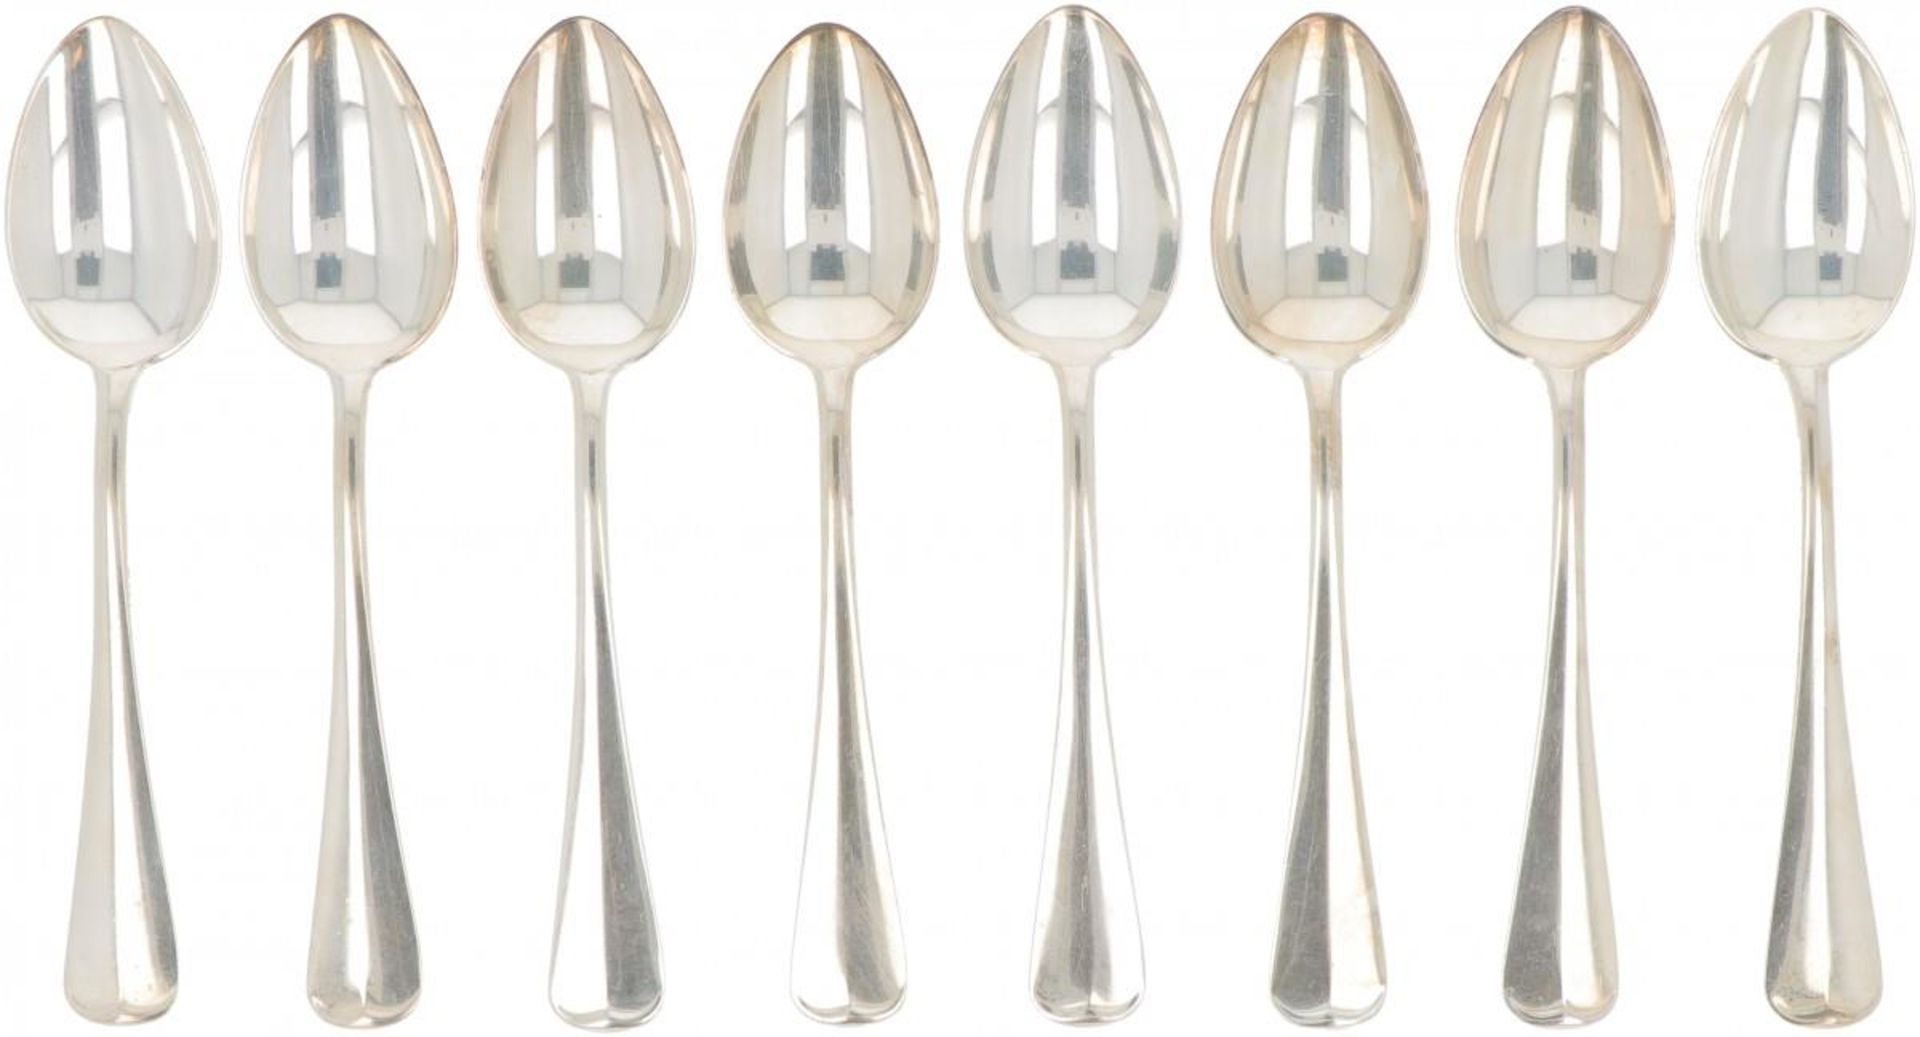 (8) piece set of spoons "Haags Lofje" silver.